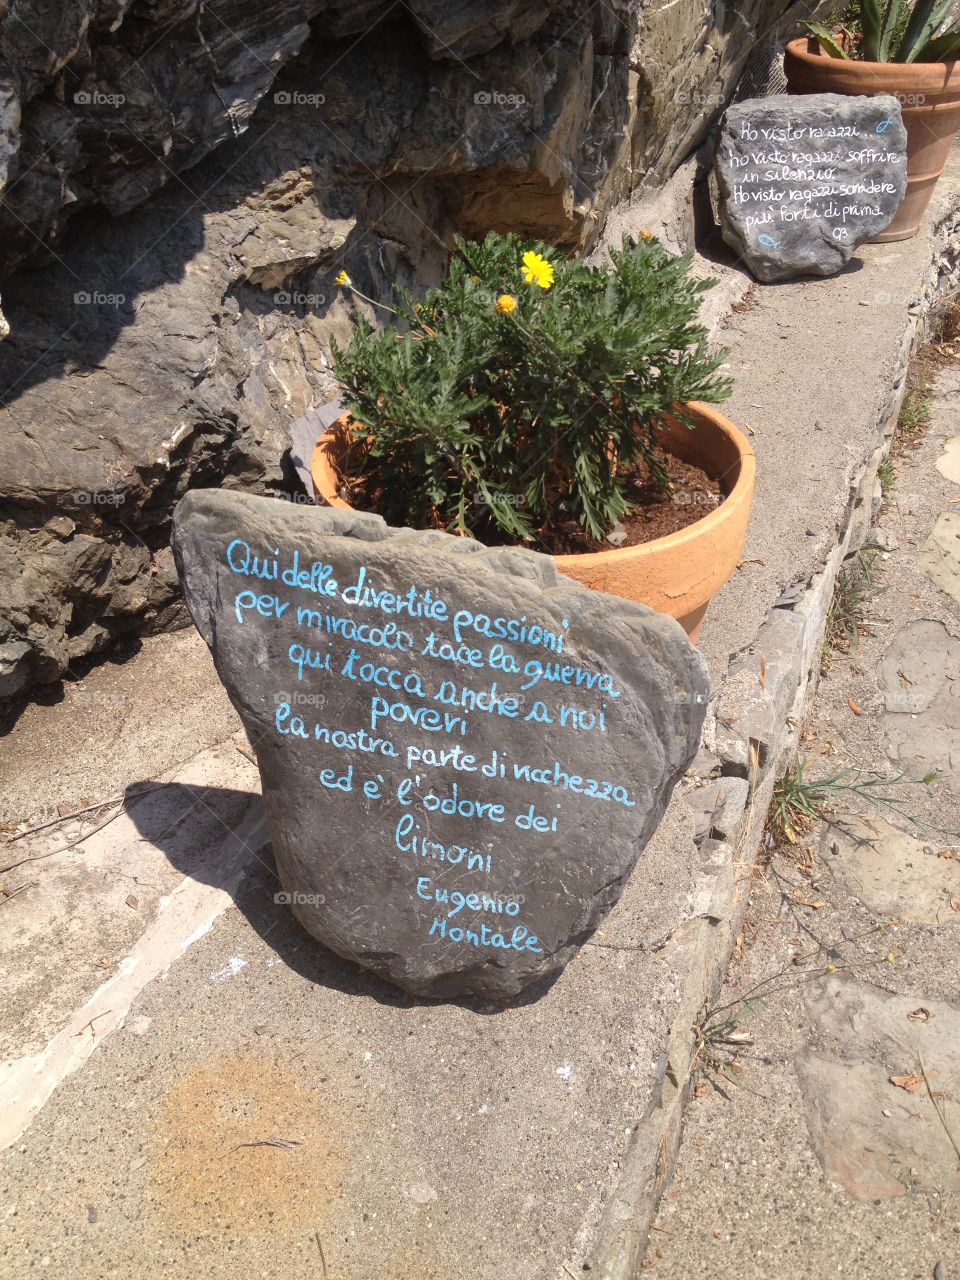 Plant with Italian poem. This photo was taken in one of the five cities Cinque Terre. It displays an Italian poem written near on a rock